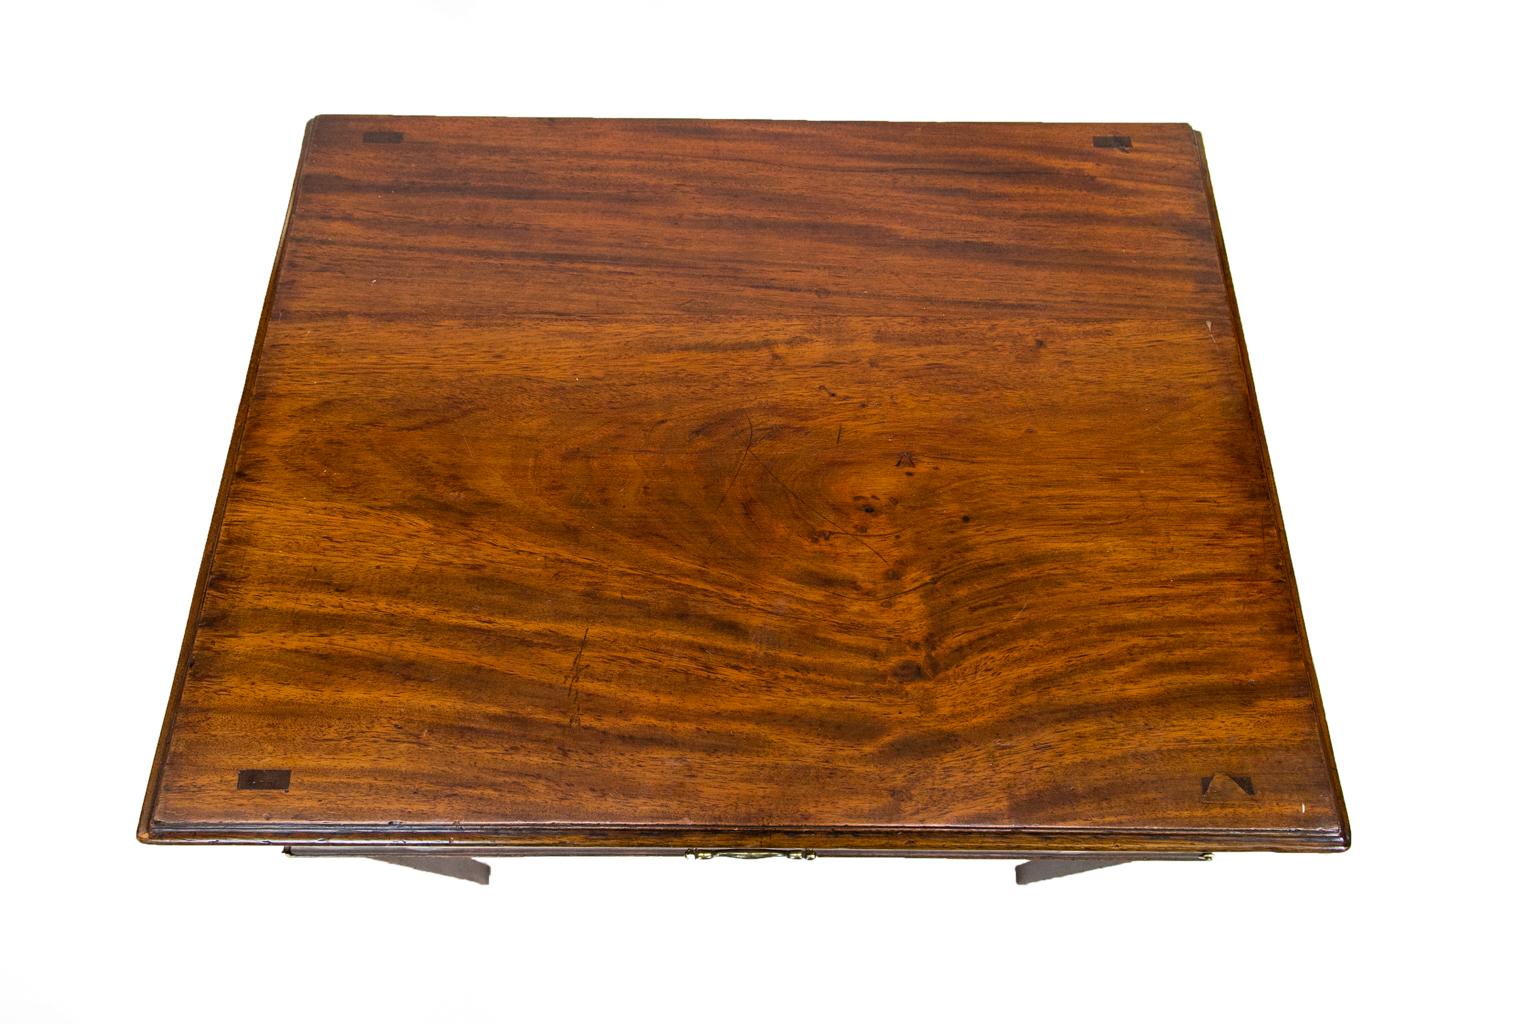 This unique table has the original finish and patina. The top has an ogee molded edge. The drawer is crossbanded with mahogany and has boxwood edging and string inlay. The drawer also has its original hardware and pulls out to reveal two drop